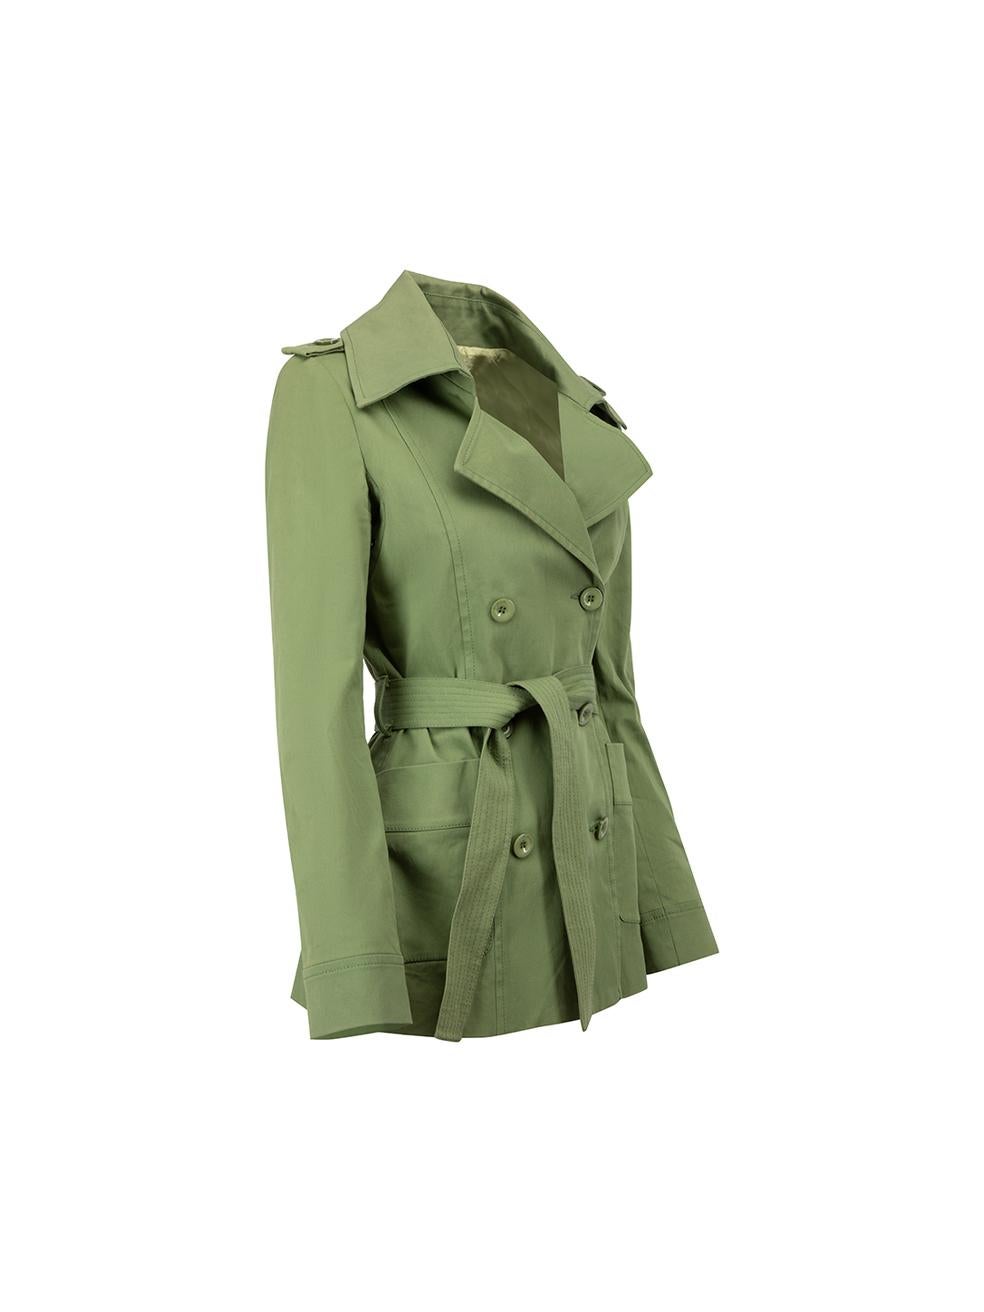 CONDITION is Never Worn. No visible wear to coat is evident on this used Pinko designer resale item. 



Details


Green

Cotton 

Double breasted trench coat

Long sleeves

Button and belt fastening 

2x Pockets on the front





Made in